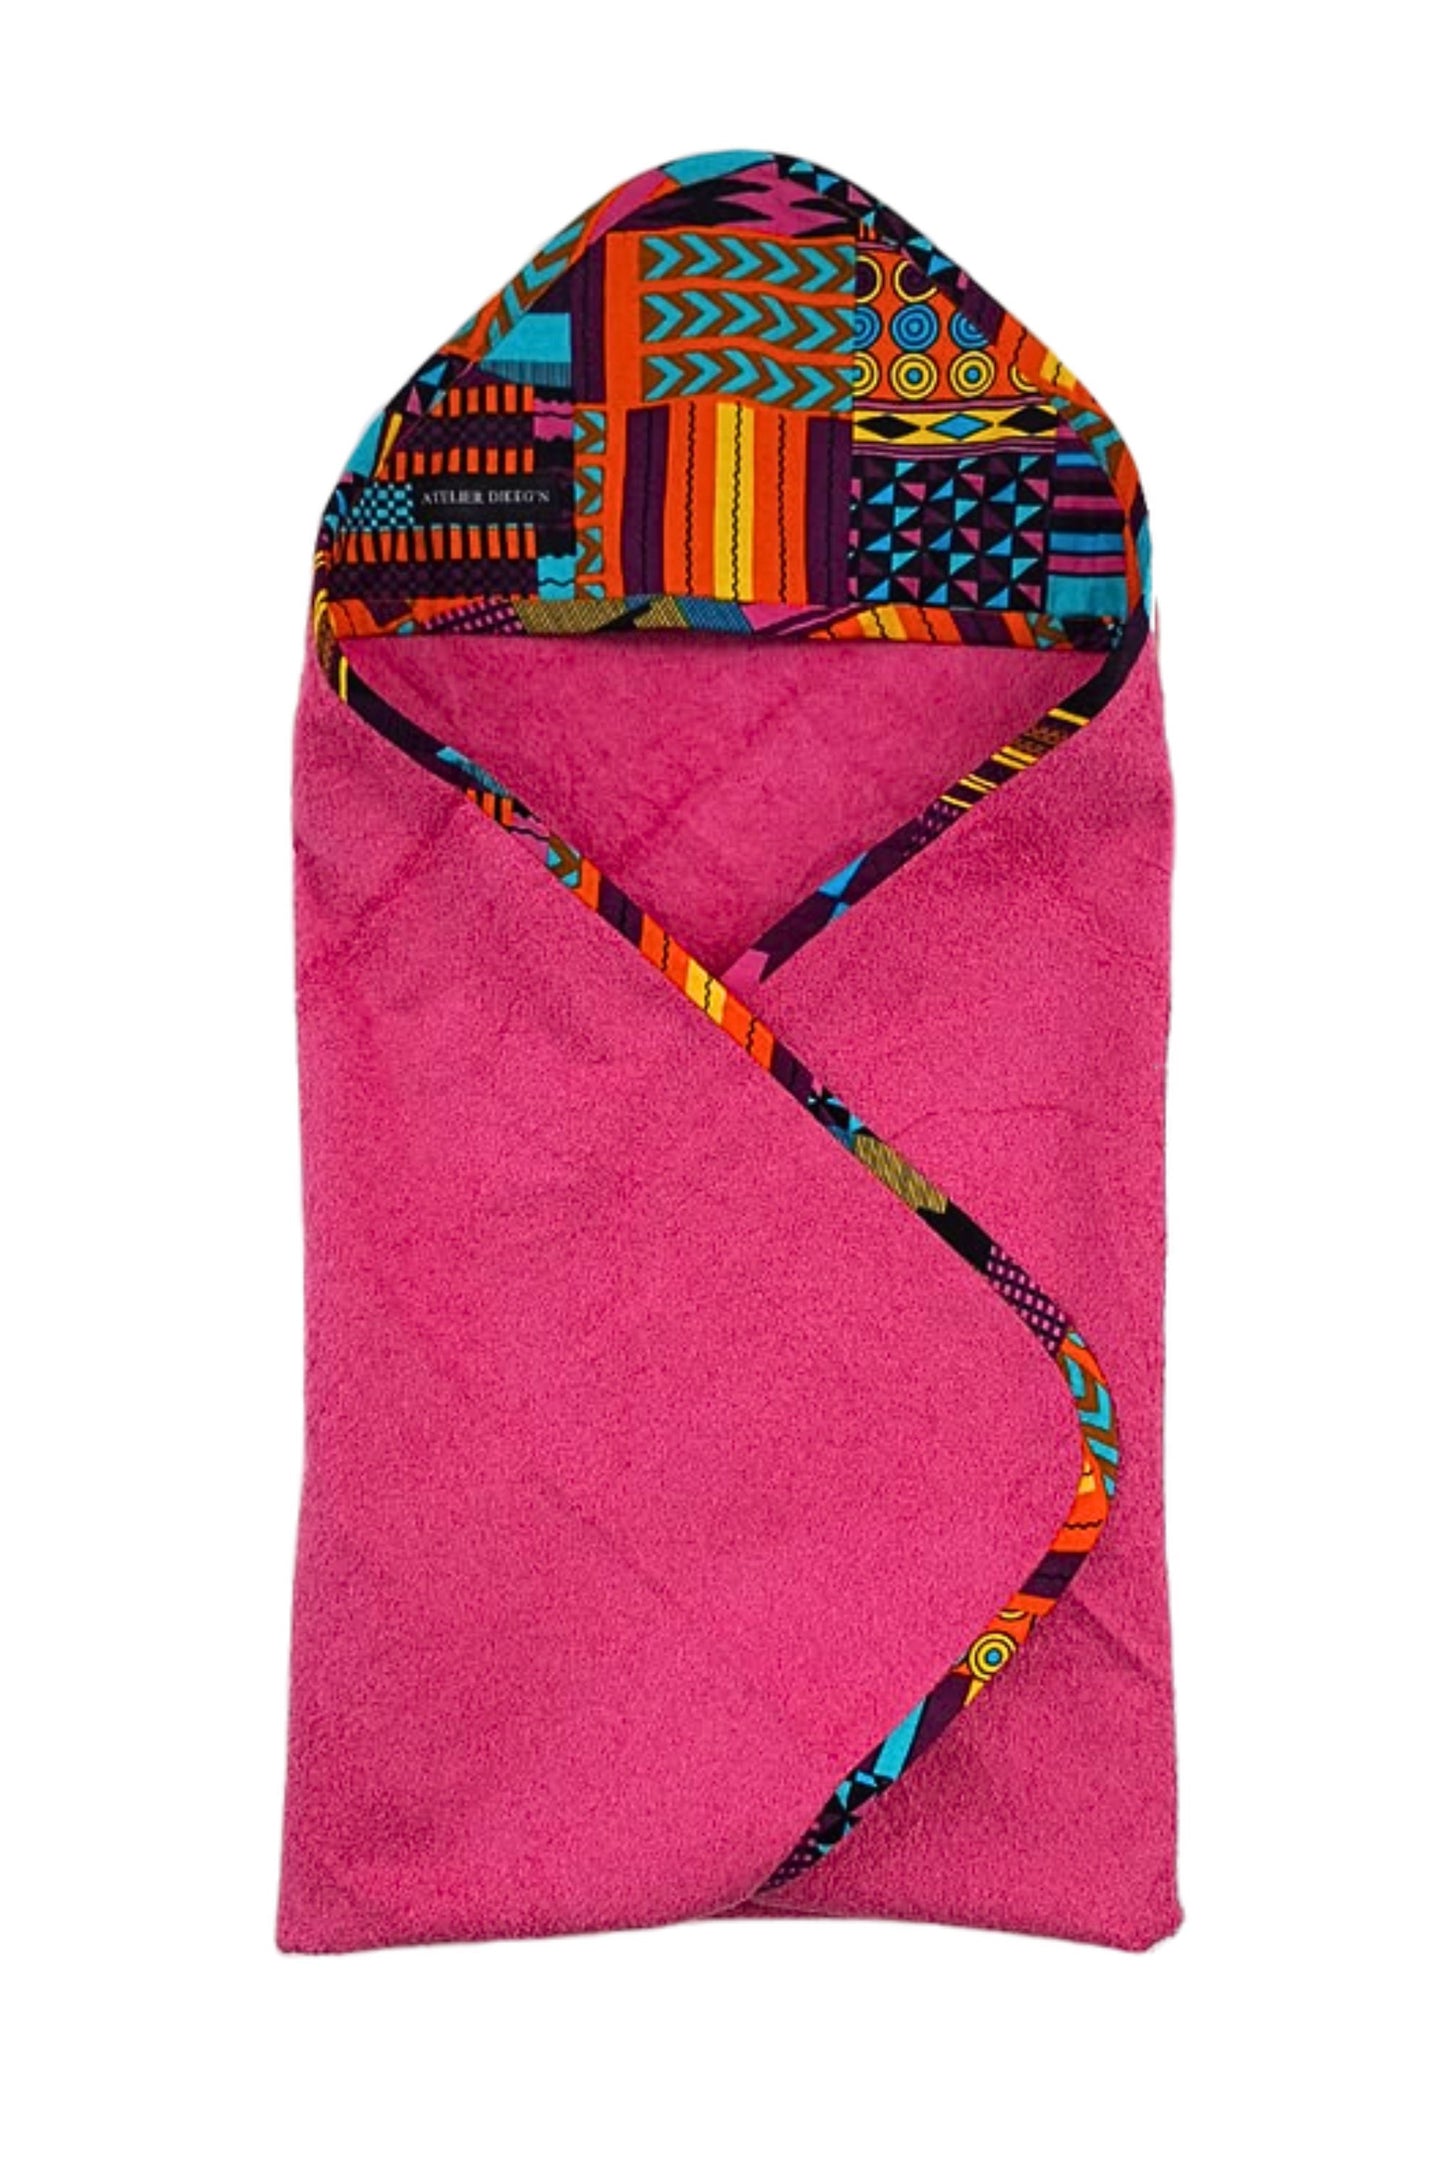 Pink Baby Hooded Towel With An African Print Touch